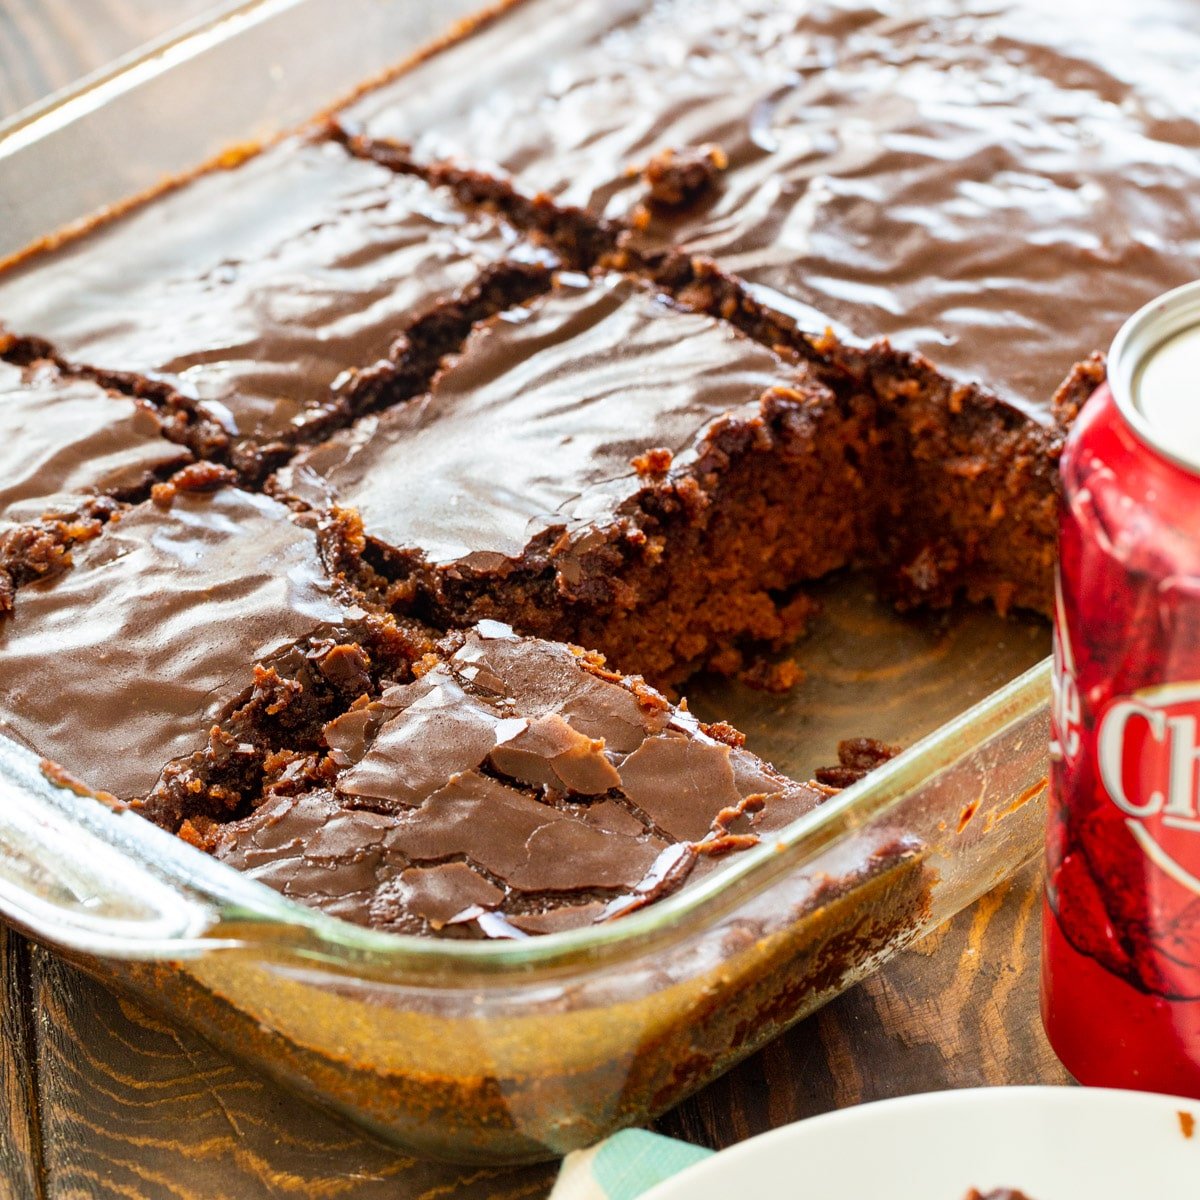 Cheerwine Chocolate Cake cut into squares in a baking dish.